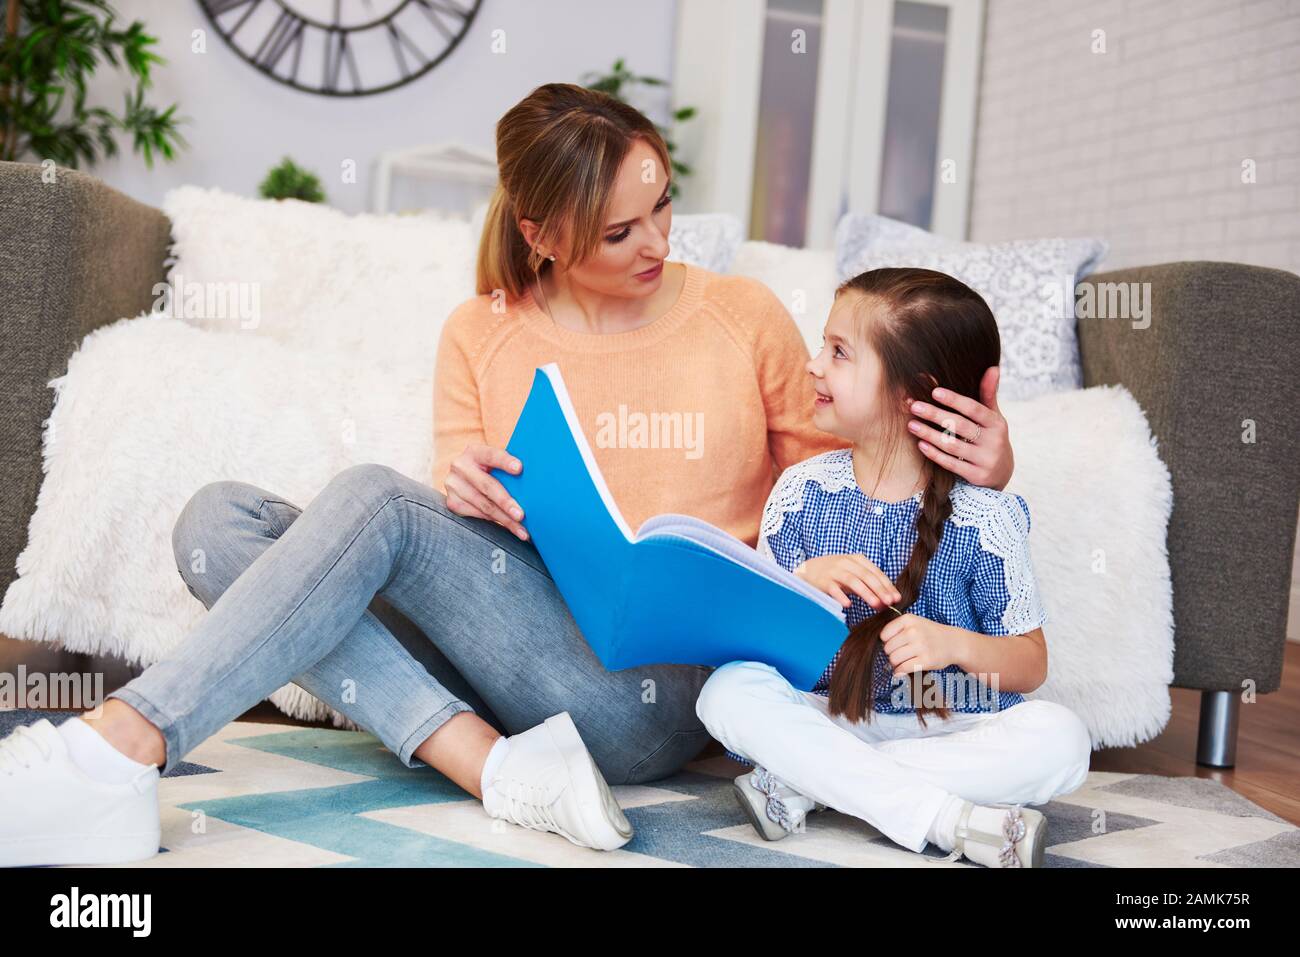 Affectionate mom helping her daughter with homework Stock Photo